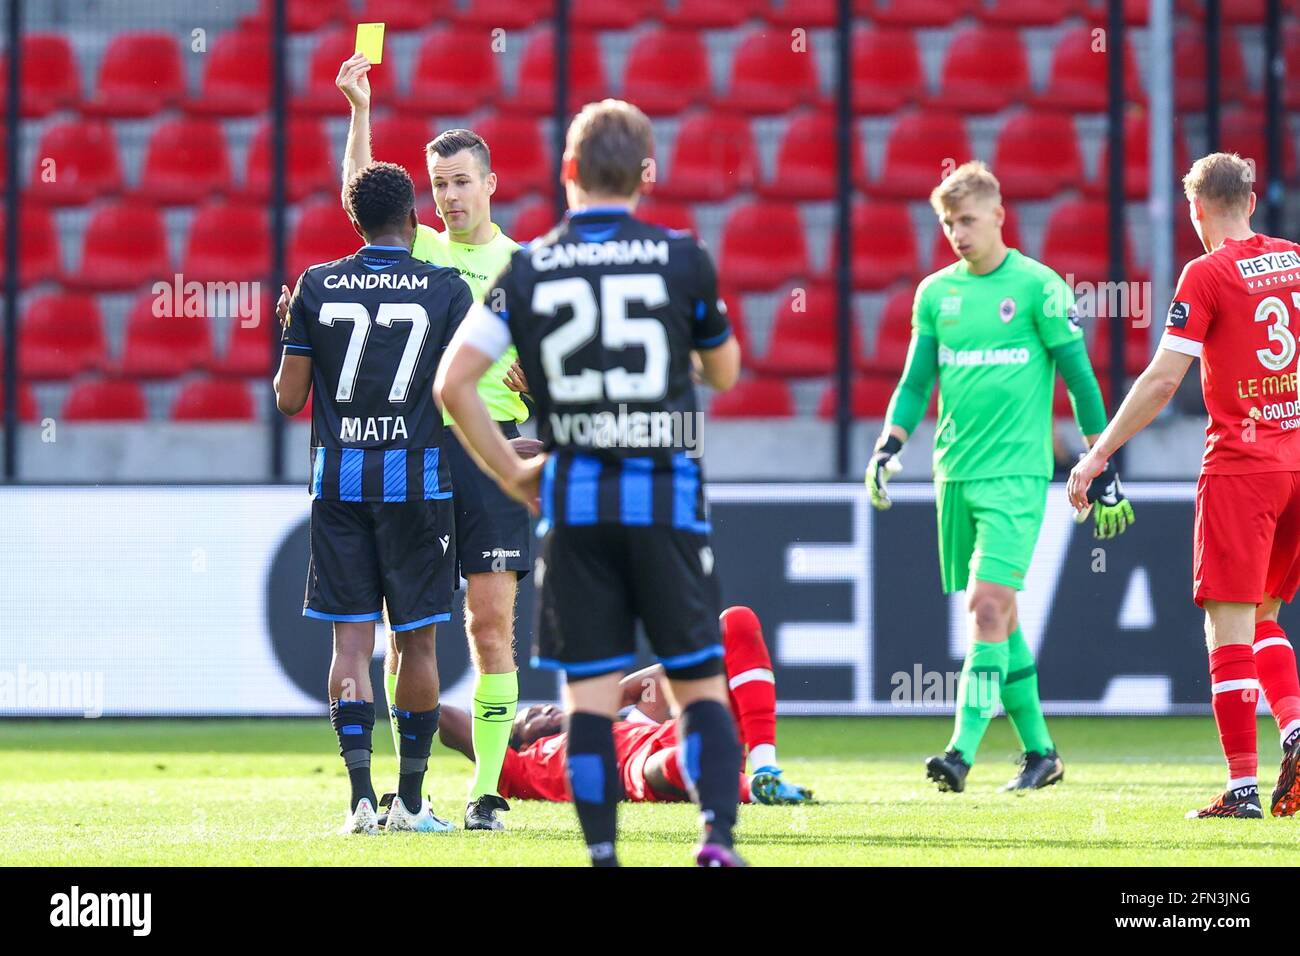 ANTWERP, BELGIUM - MAY 13: Clinton Mata of Club Brugge receiving a yellow card by referee Bram van Driessche during the Jupiler Pro League match betwe Stock Photo